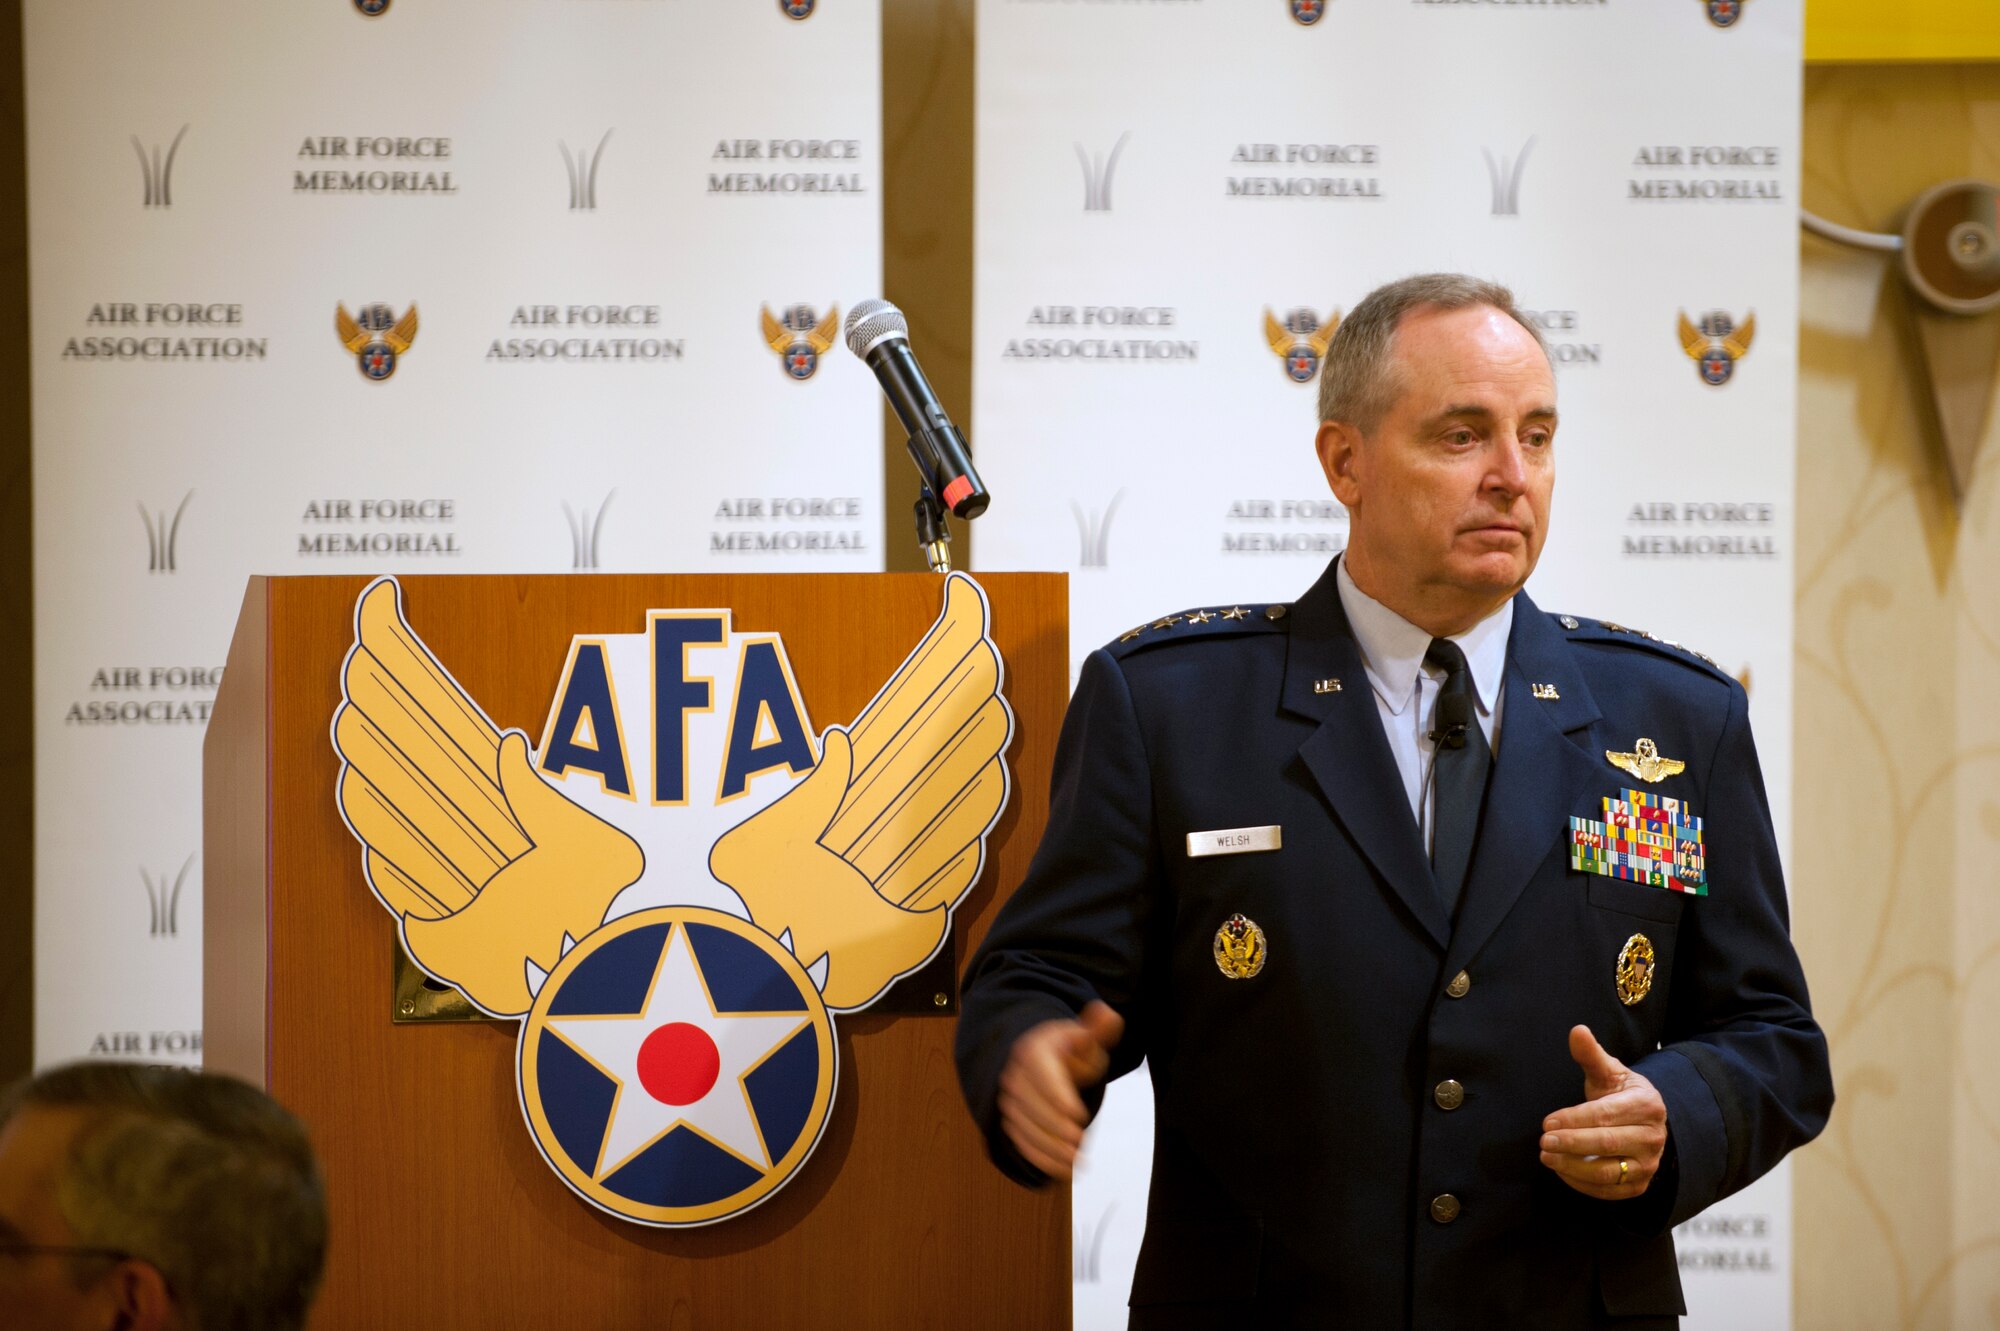 Gen. Mark Welsh, Chief of Staff of the U.S. Air Force, speaks during the Air Force Association breakfast in Arlington, Va., June 17, 2013. Welsh gave comments on where the Air Force is today and where it hopes to be in 2023 and that the Airmen serving today, can and will solve the issues of the Air Force. (U.S. Air Force photo/Senior Airman Carlin Leslie)

